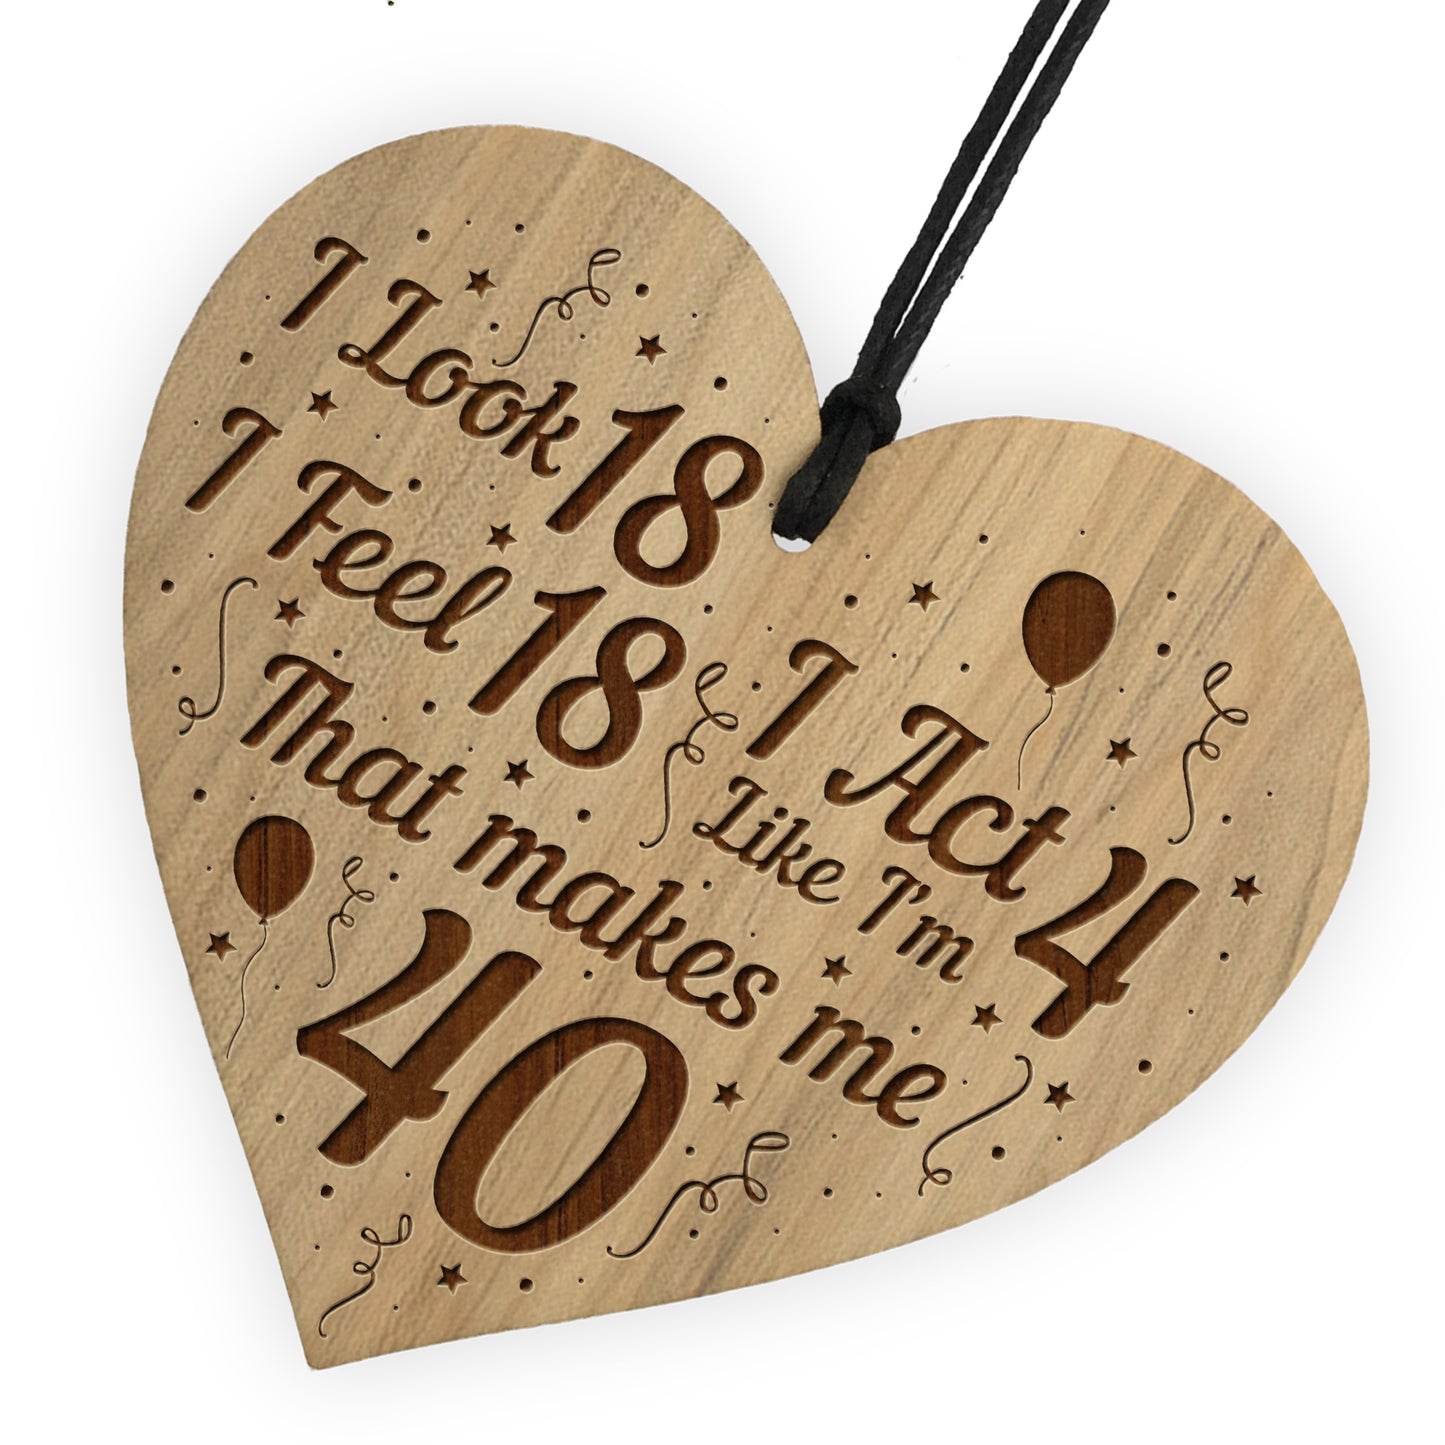 40th Birthday Gift For Him Her Engraved Heart Funny 40th